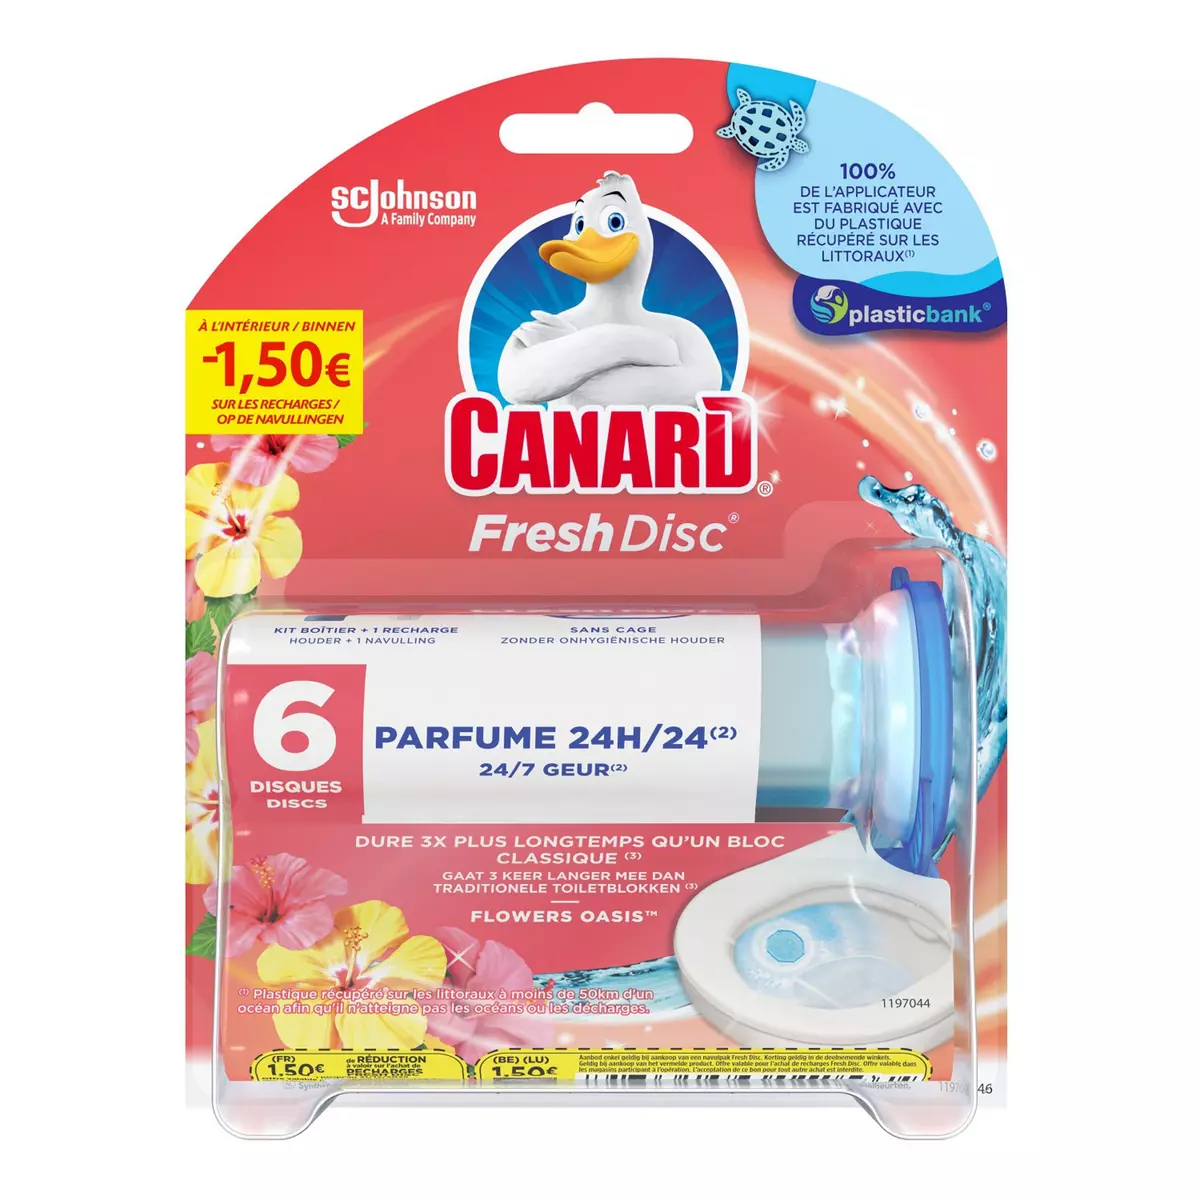 CANARD Fresh Disc flowers oasis 6 disques